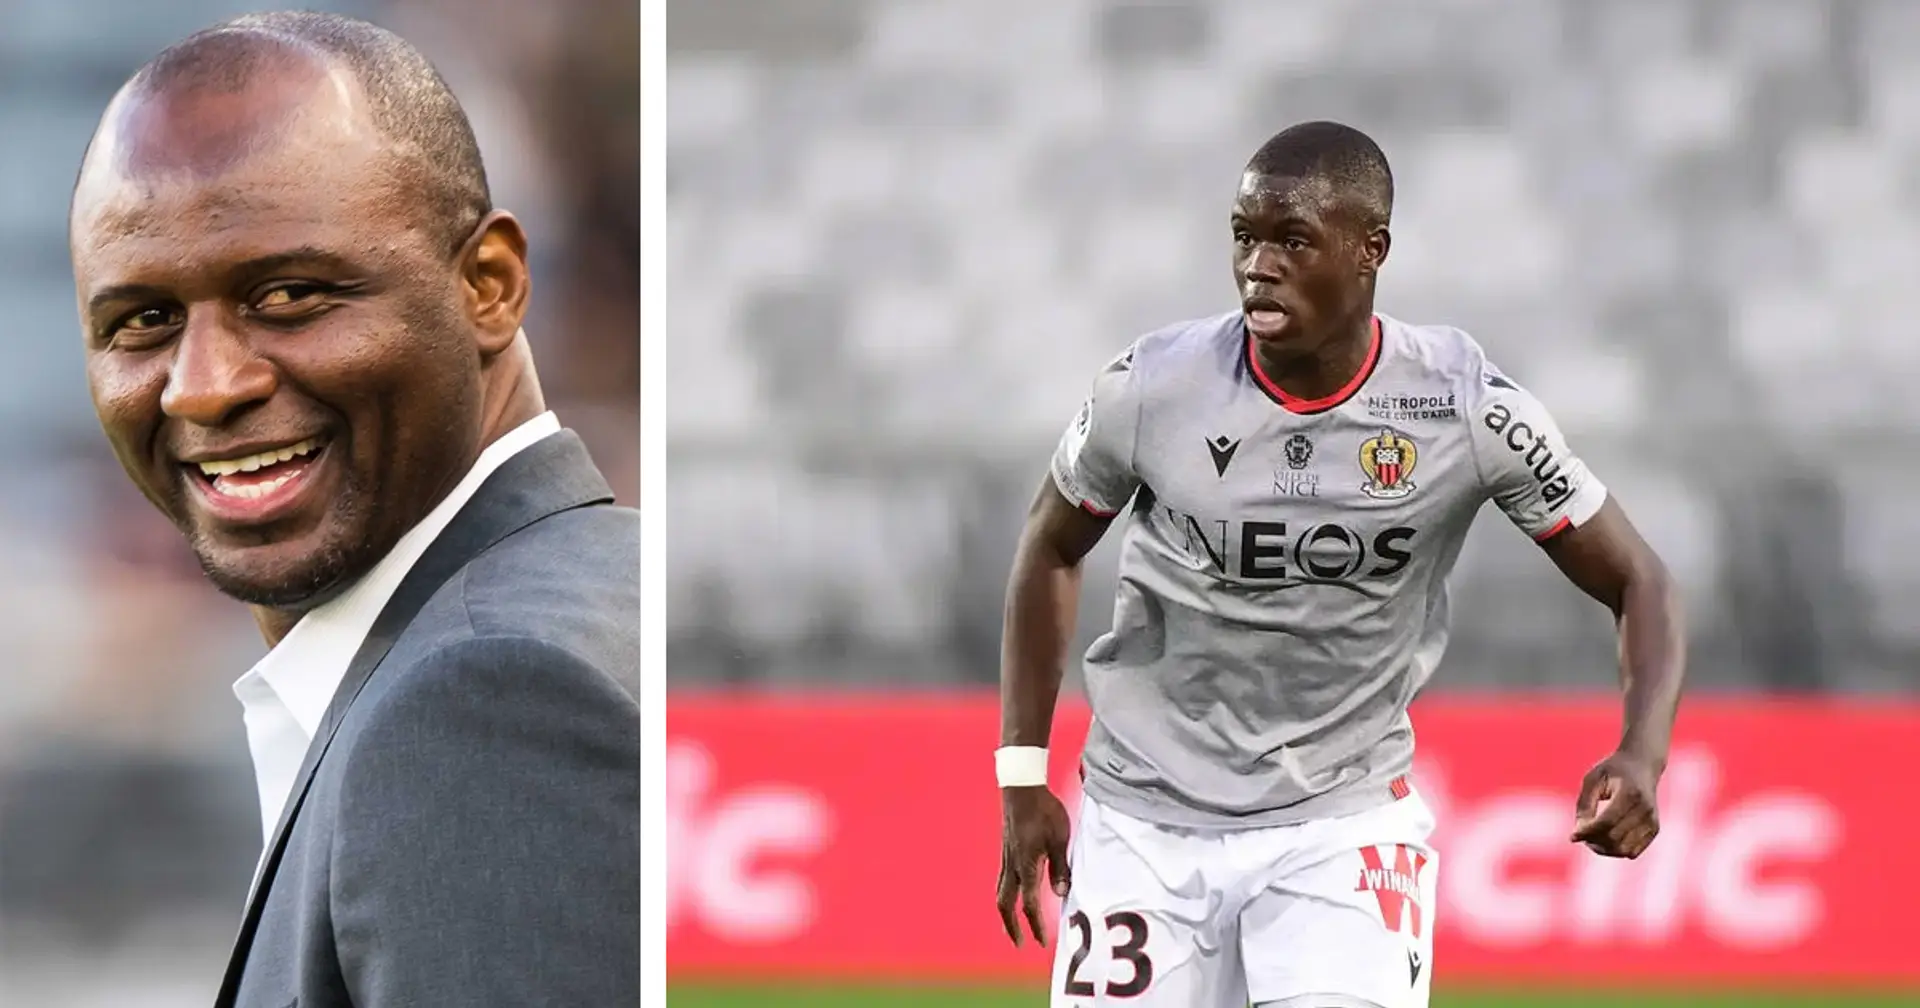 Arsenal reportedly offer contract to defender Malang Sarr – Patrick Vieira described him as 'leader'